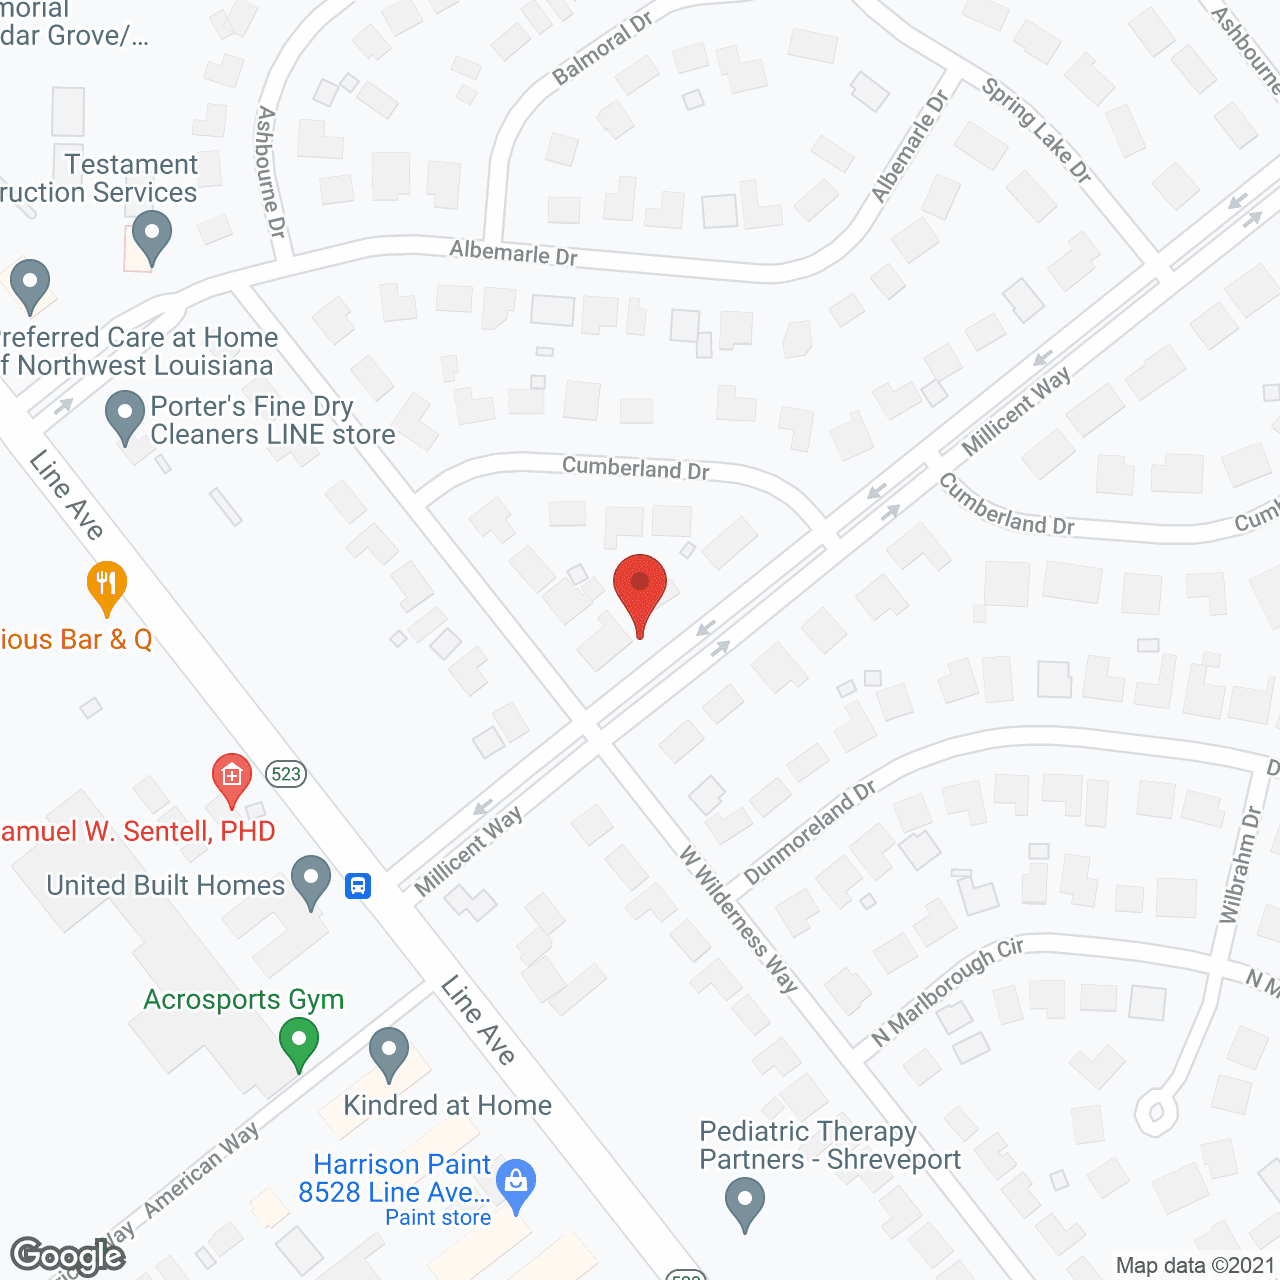 The Gables at Spring Lake Assisted Living in google map